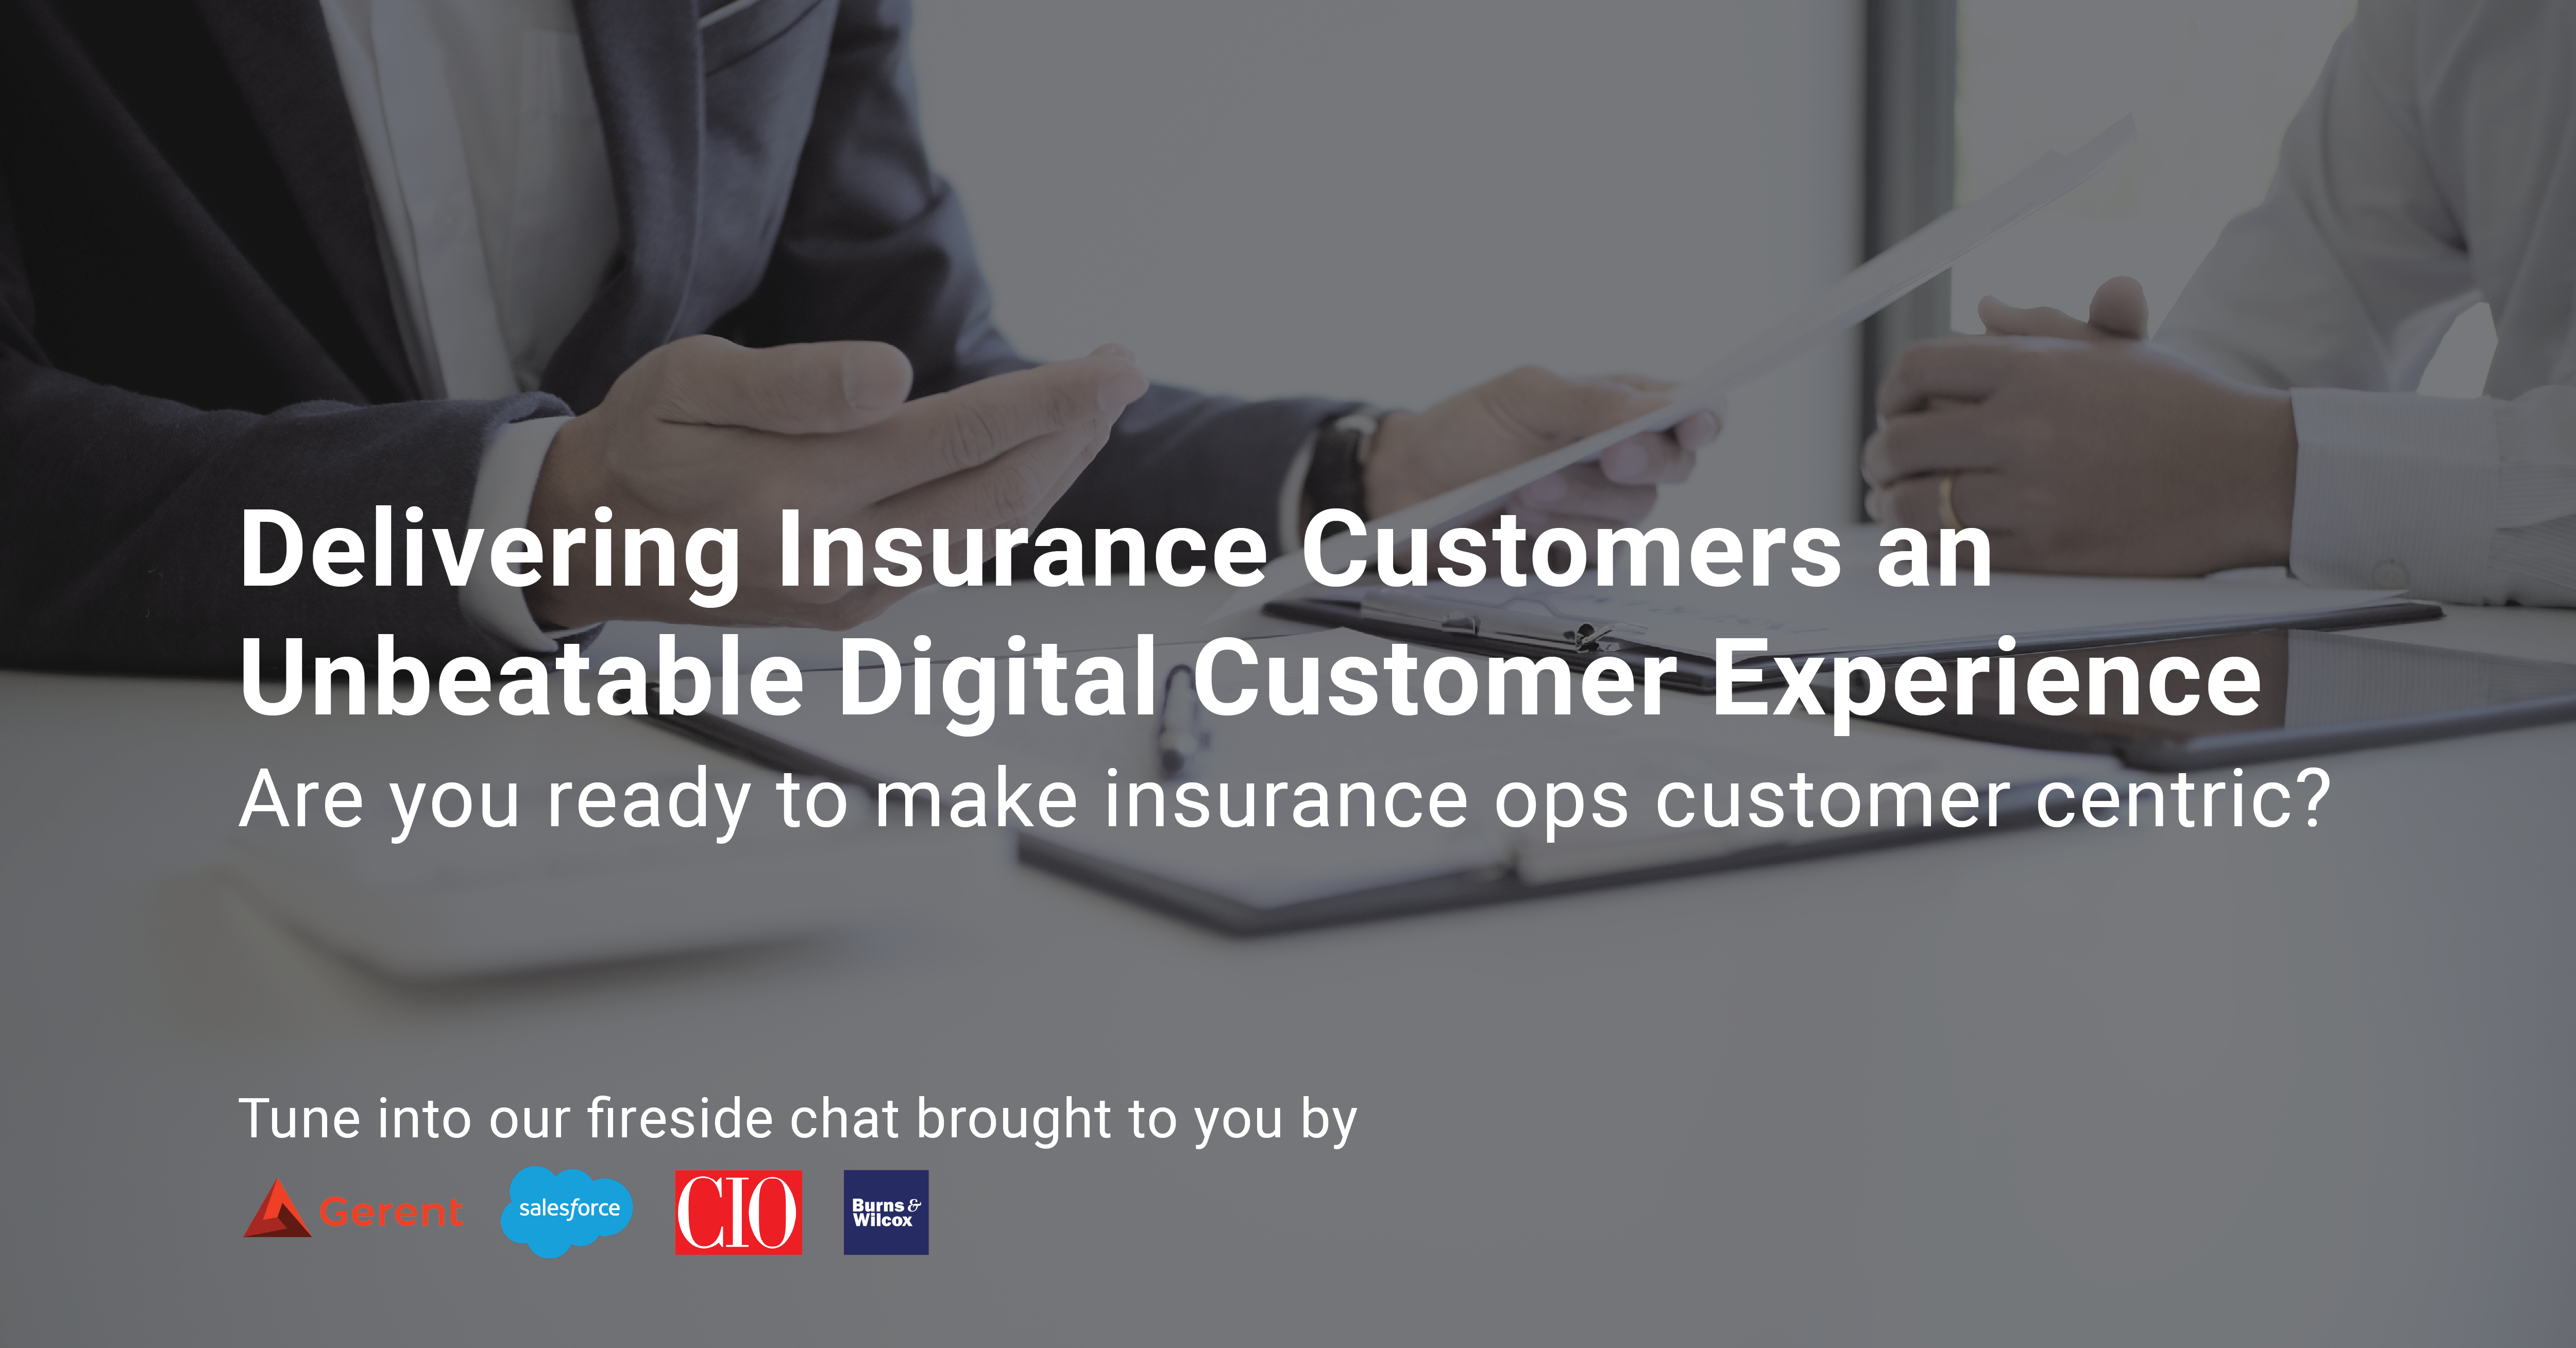 Delivering Insurance Customers an Unbeatable Digital Customer Experience